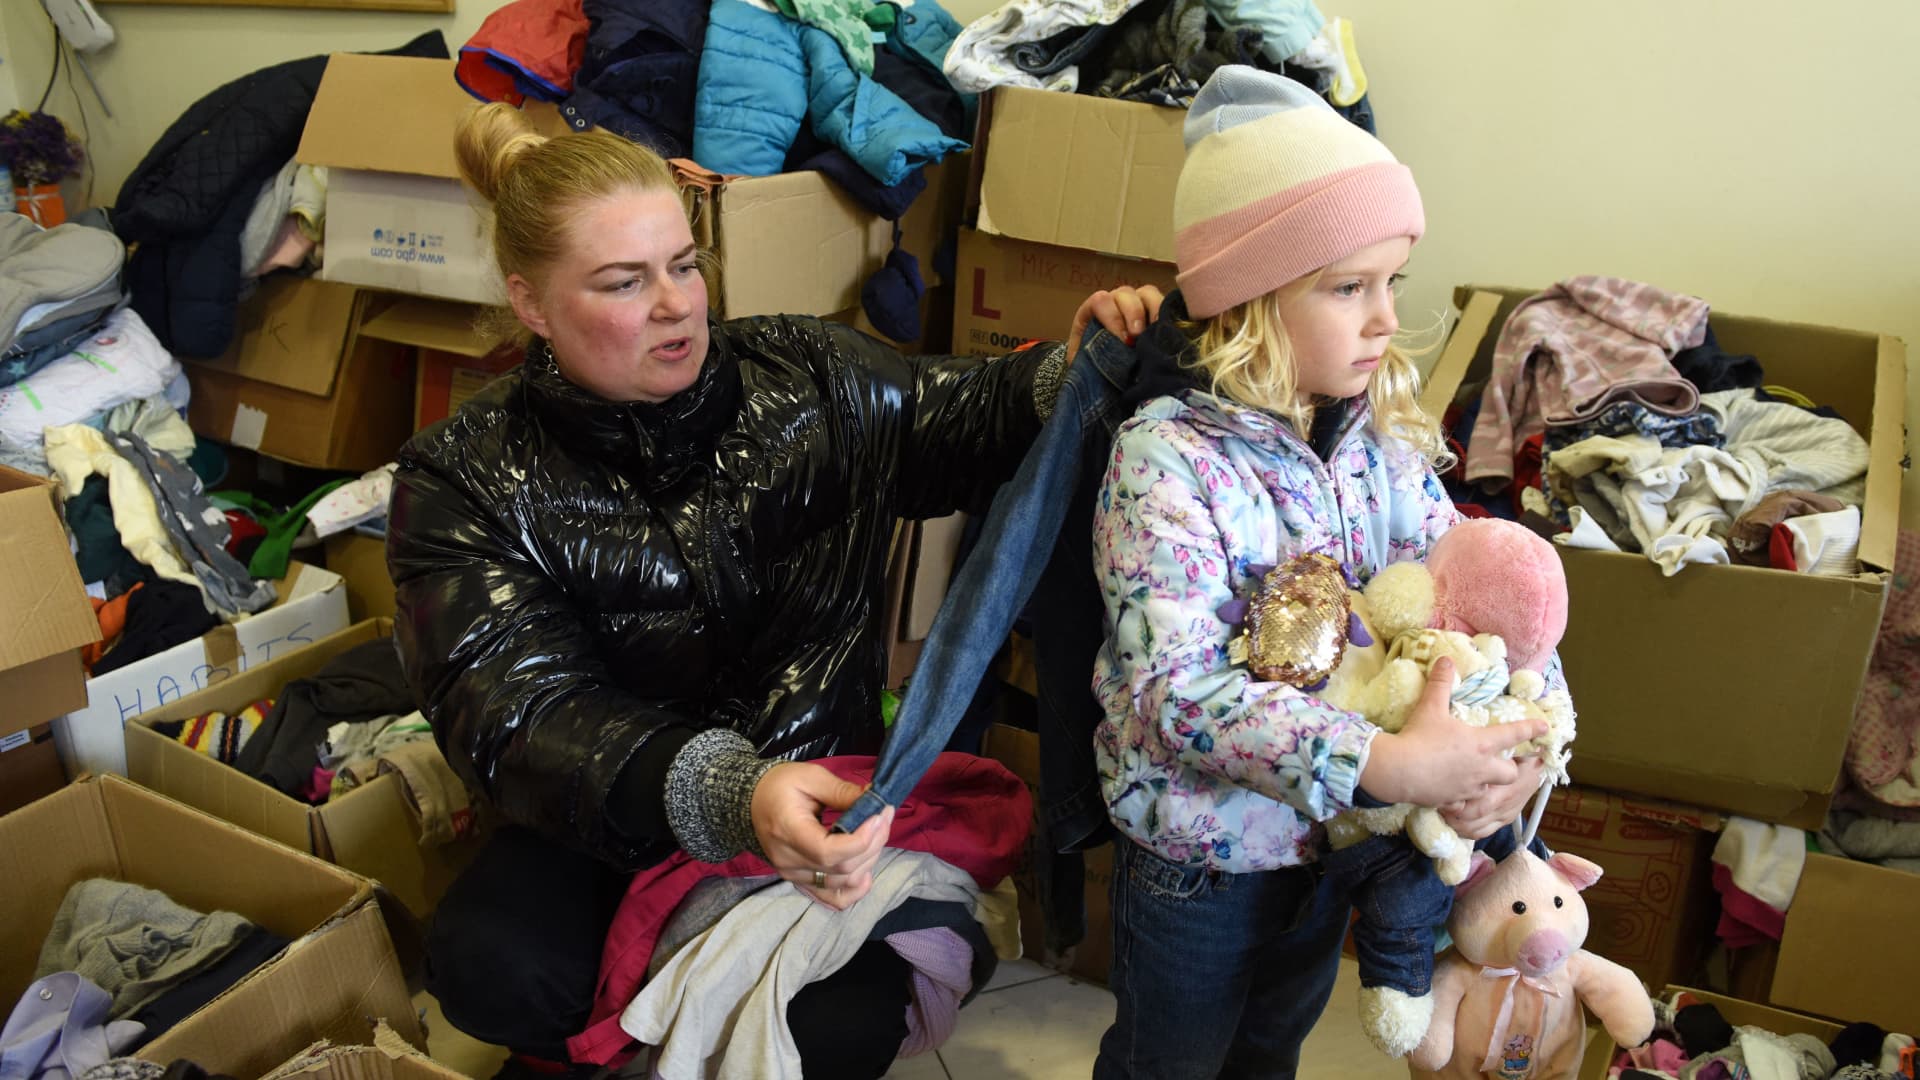 Displaced Ukrainian dentist Yana and her daughter, five-year-old Maya, look for clothes and toys at an aid distribution center in Ukraine's western city of Lviv on April 11, 2022.